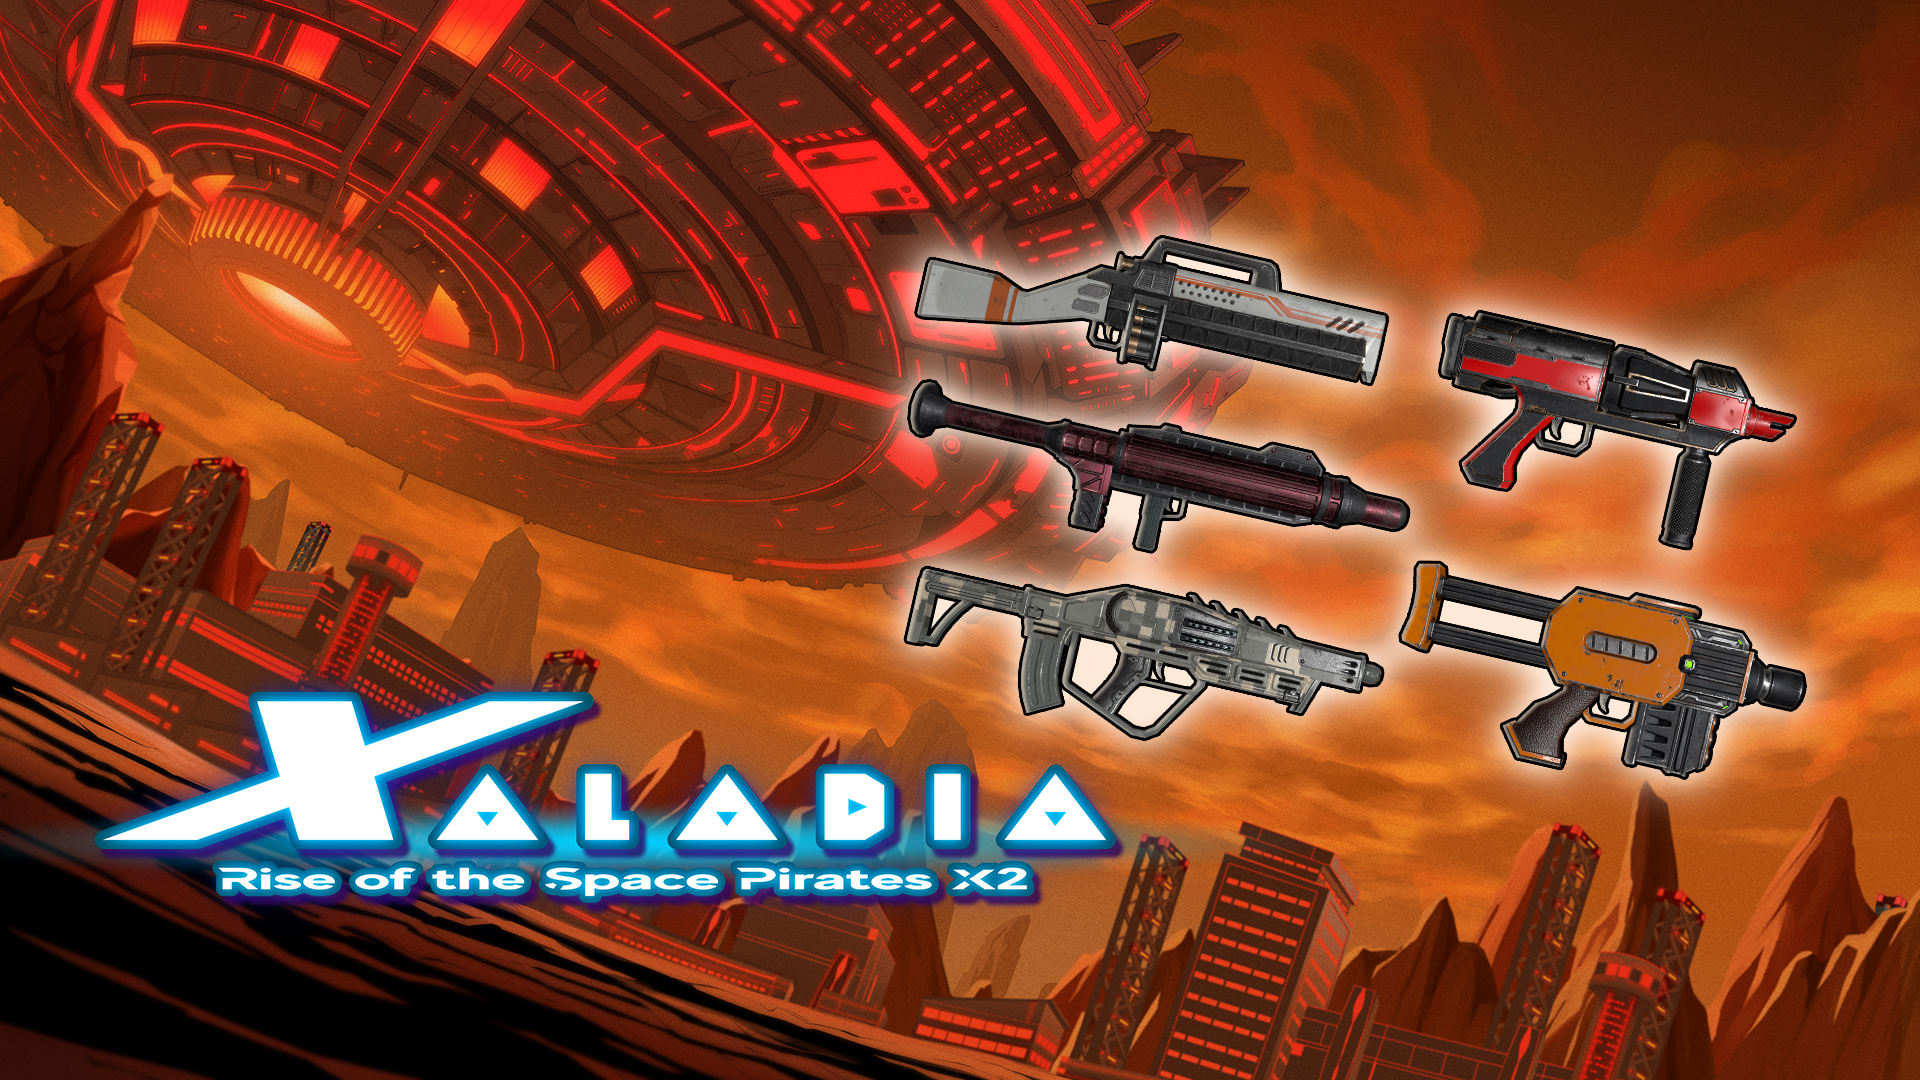 XALADIA: Rise of the Space Pirates X2 - Gun Weapons Pack 1